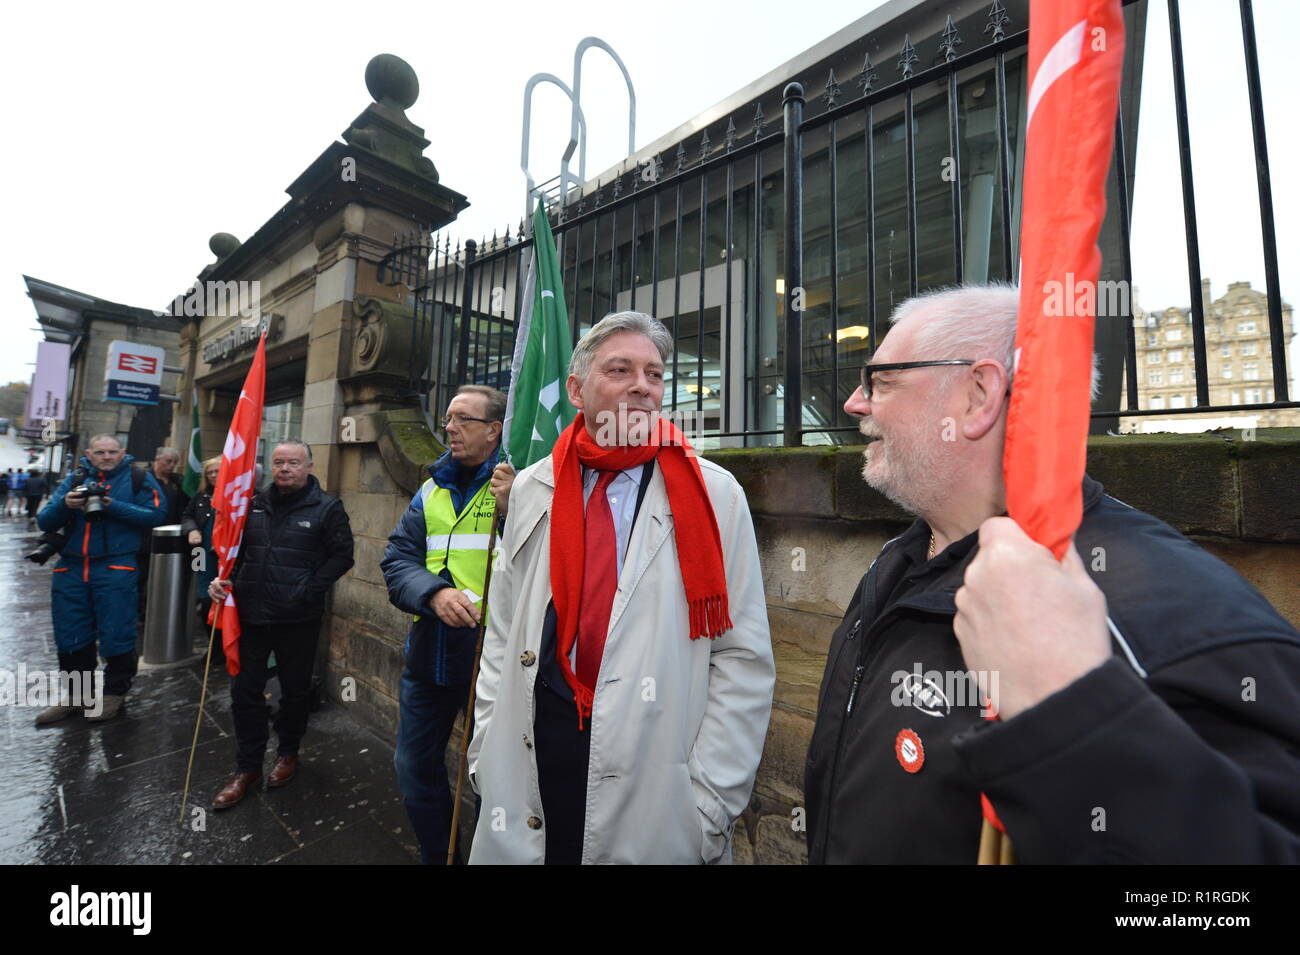 Edinburgh, UK. 14th Nov, 2018. Ahead of a Holyrood vote calling for the ScotRail break clause to be exercised, Scottish Labour leader Richard Leonard and Transport spokesperson Colin Smyth campaign at Waverley station. Credit: Colin Fisher/Alamy Live News Stock Photo